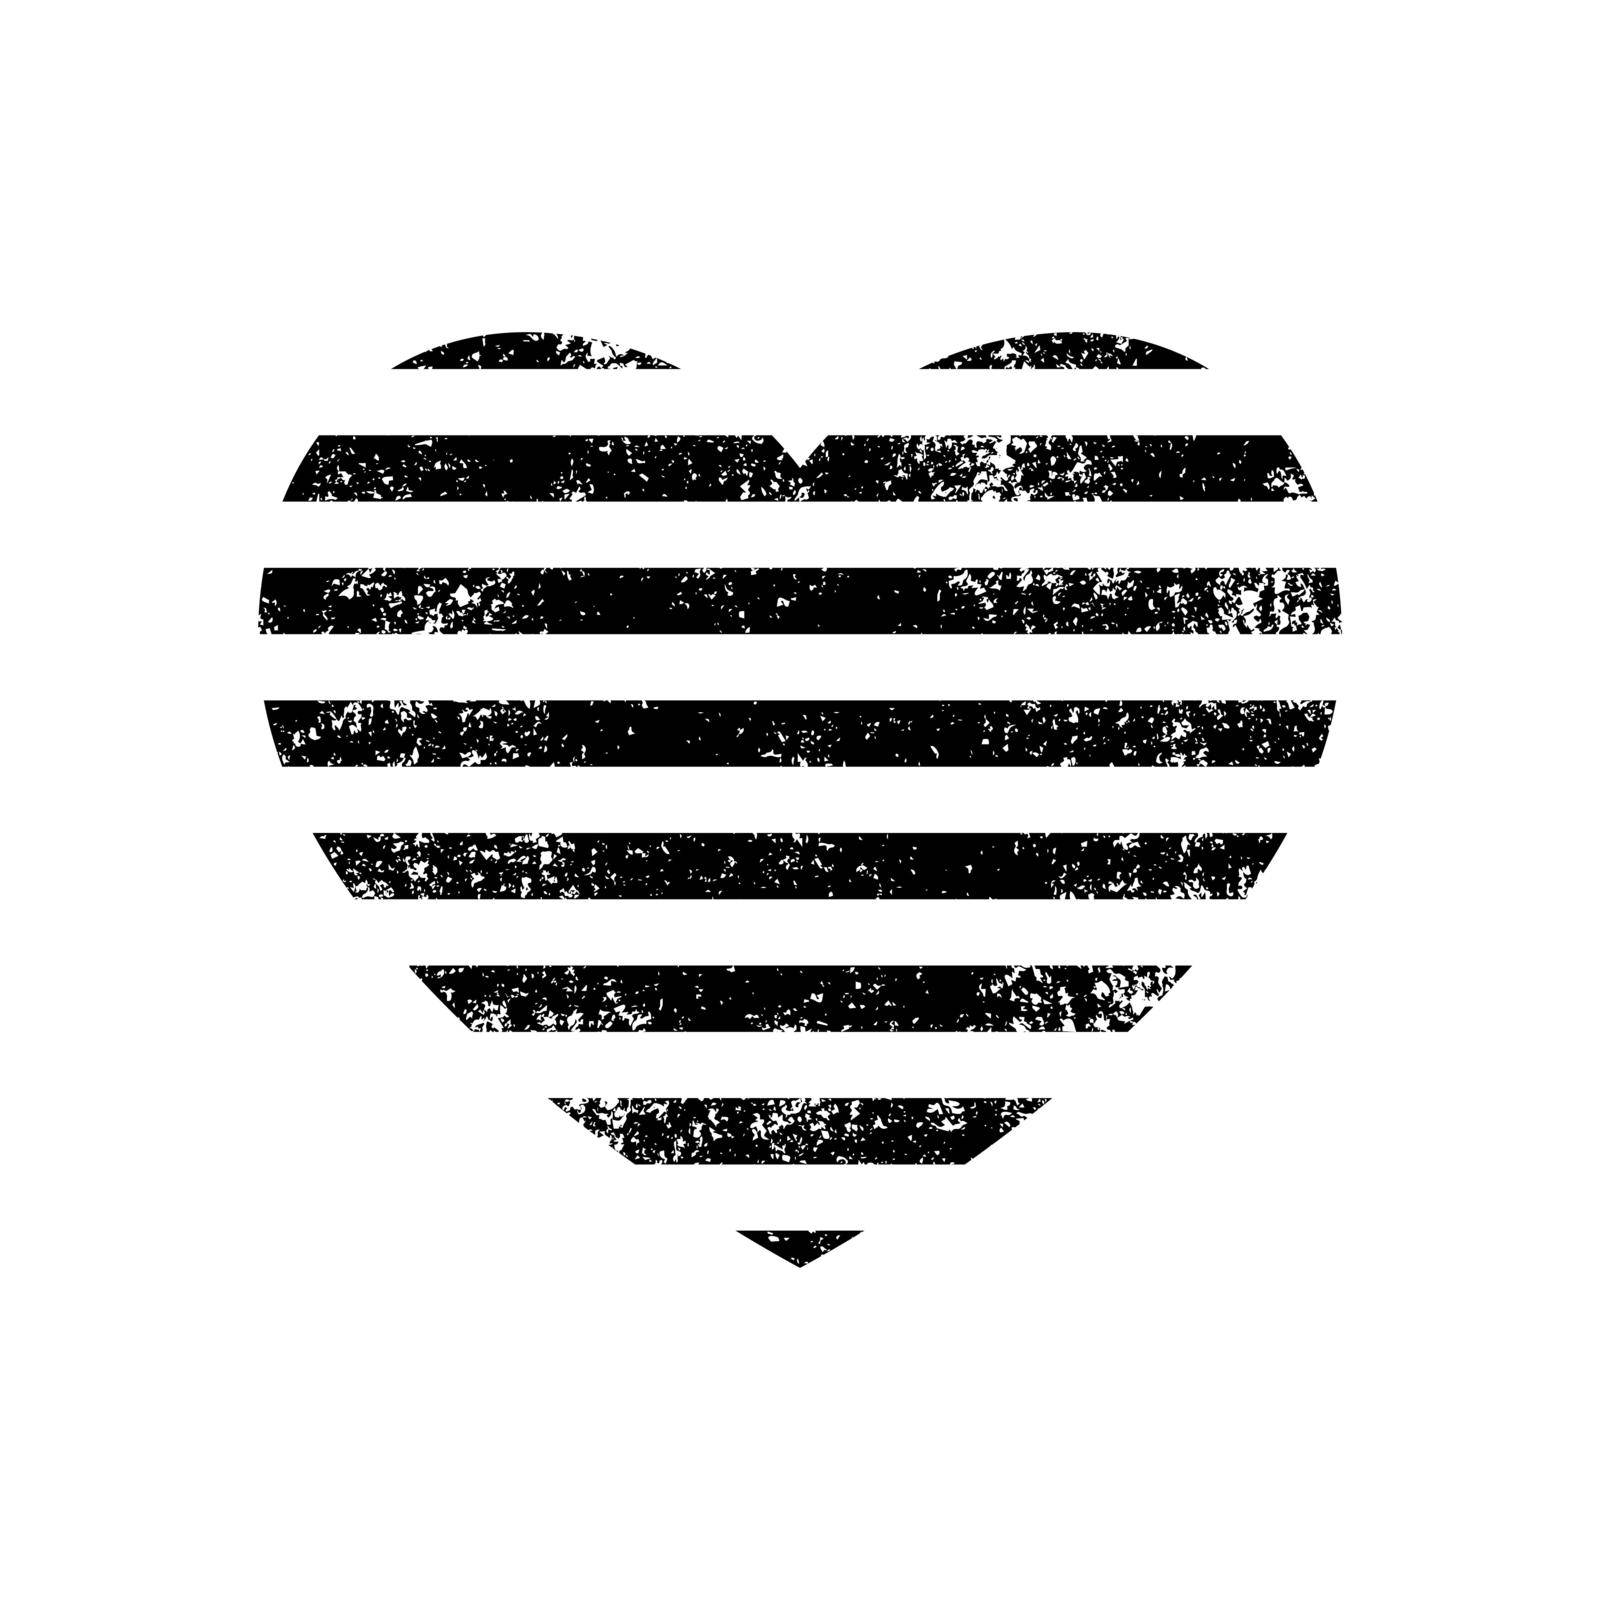 Striped heart with grunge effect